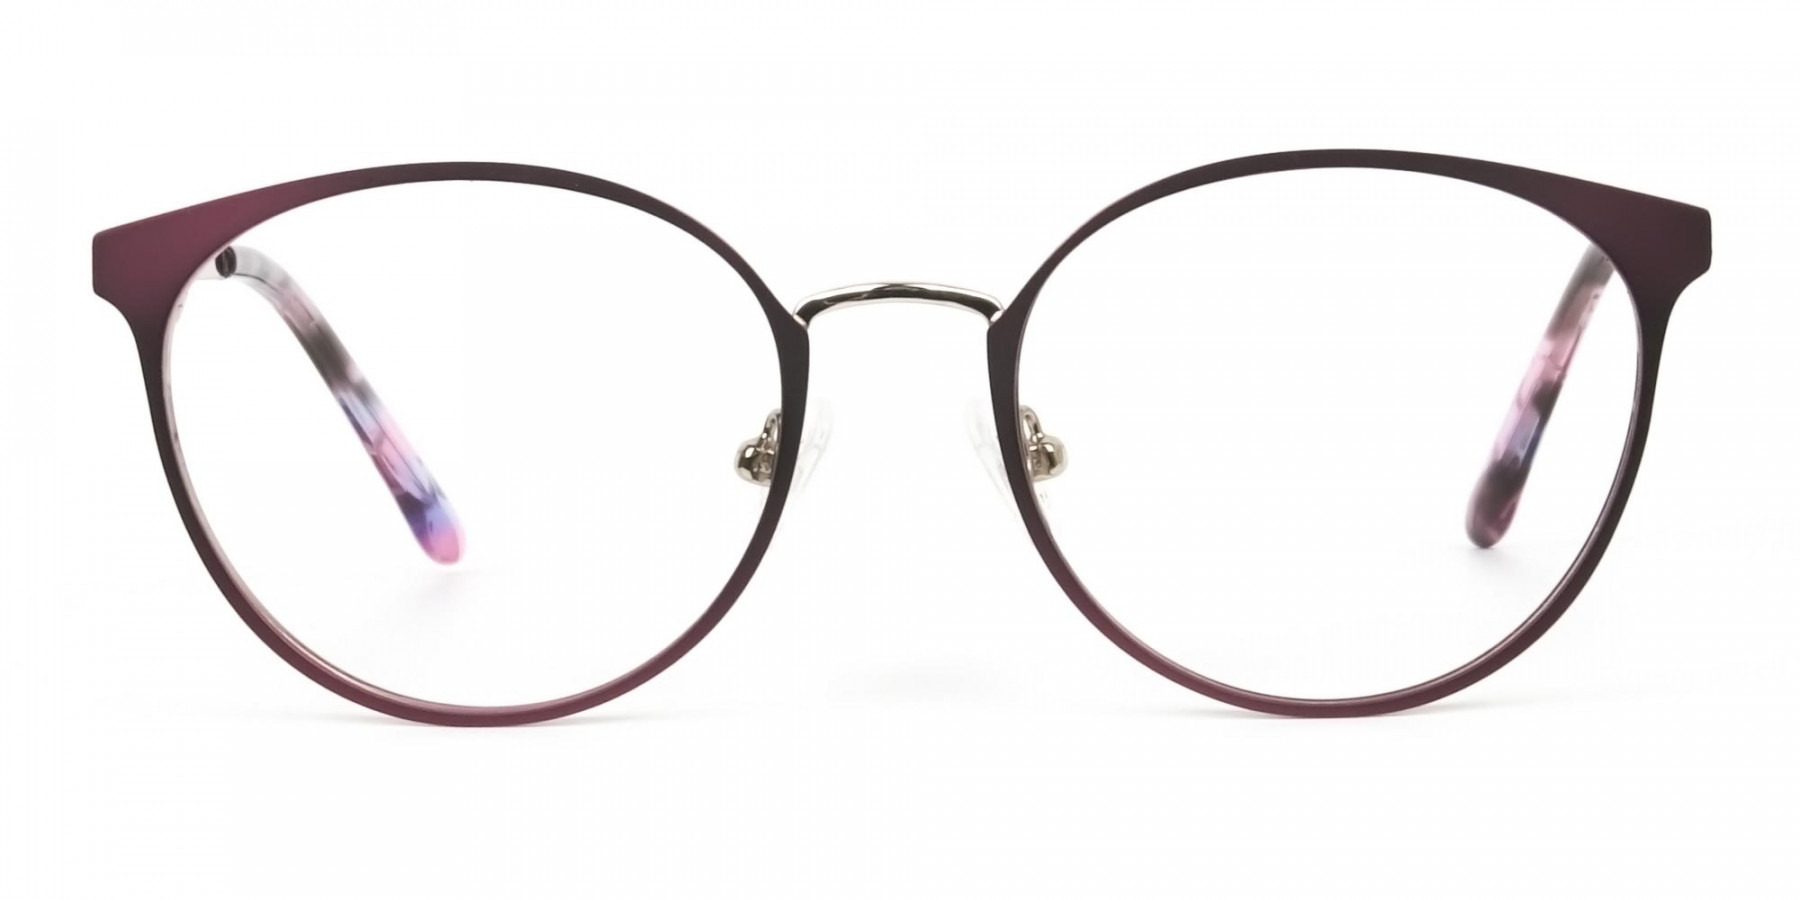 Silver Burgundy Red Spectacle Frames in Round  - 1